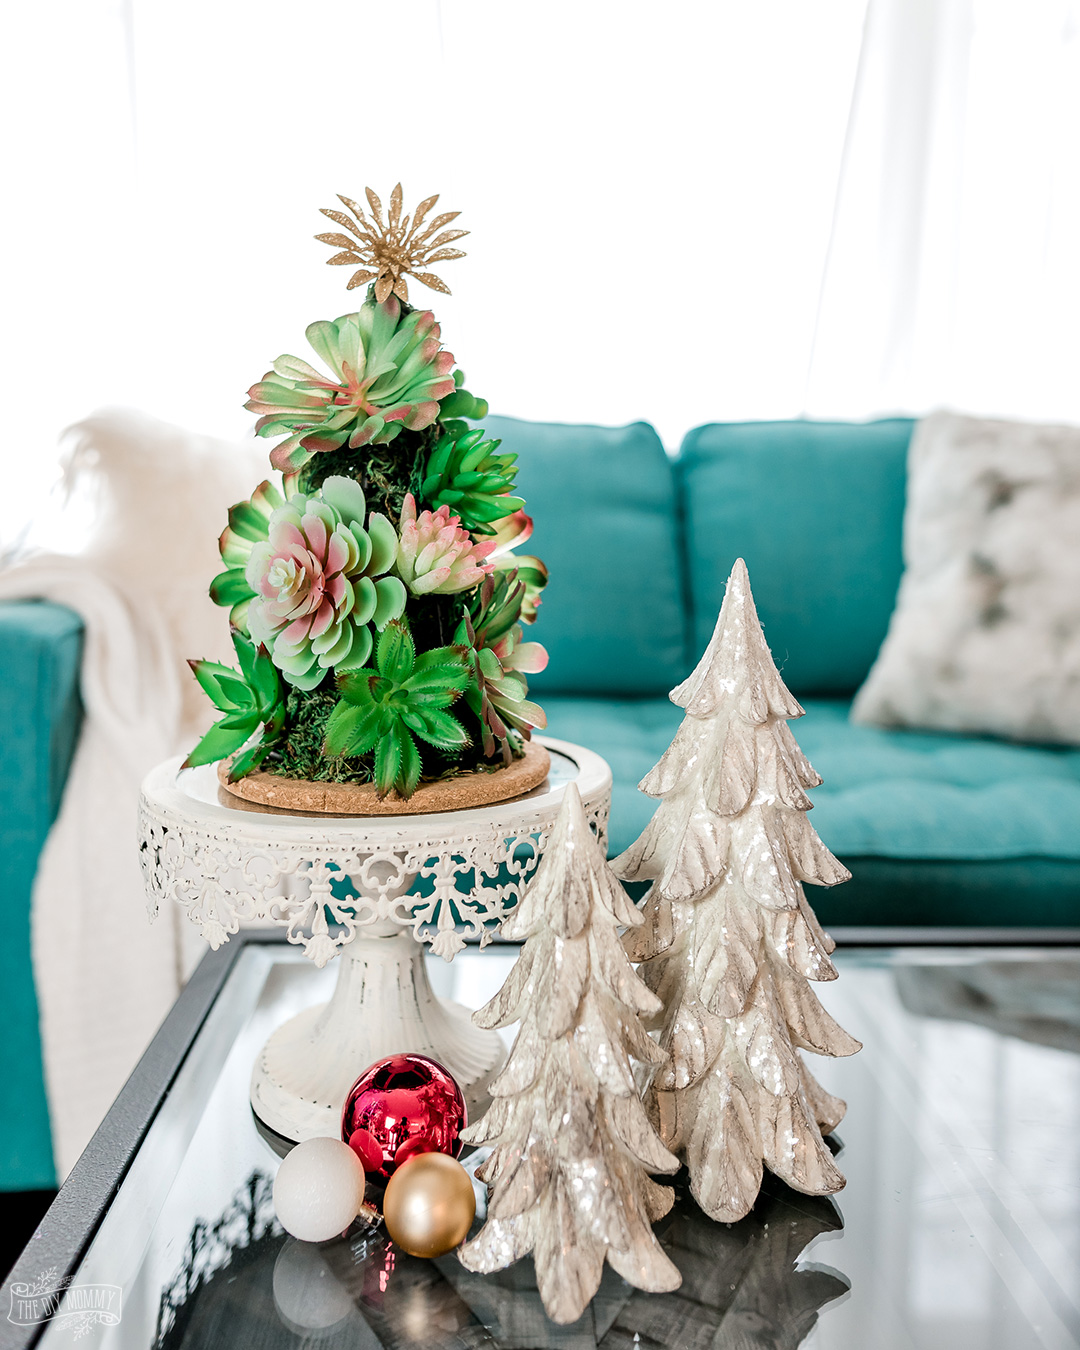 Make a faux succulent Christmas tree tabletop decor with all Dollar Tree supplies!